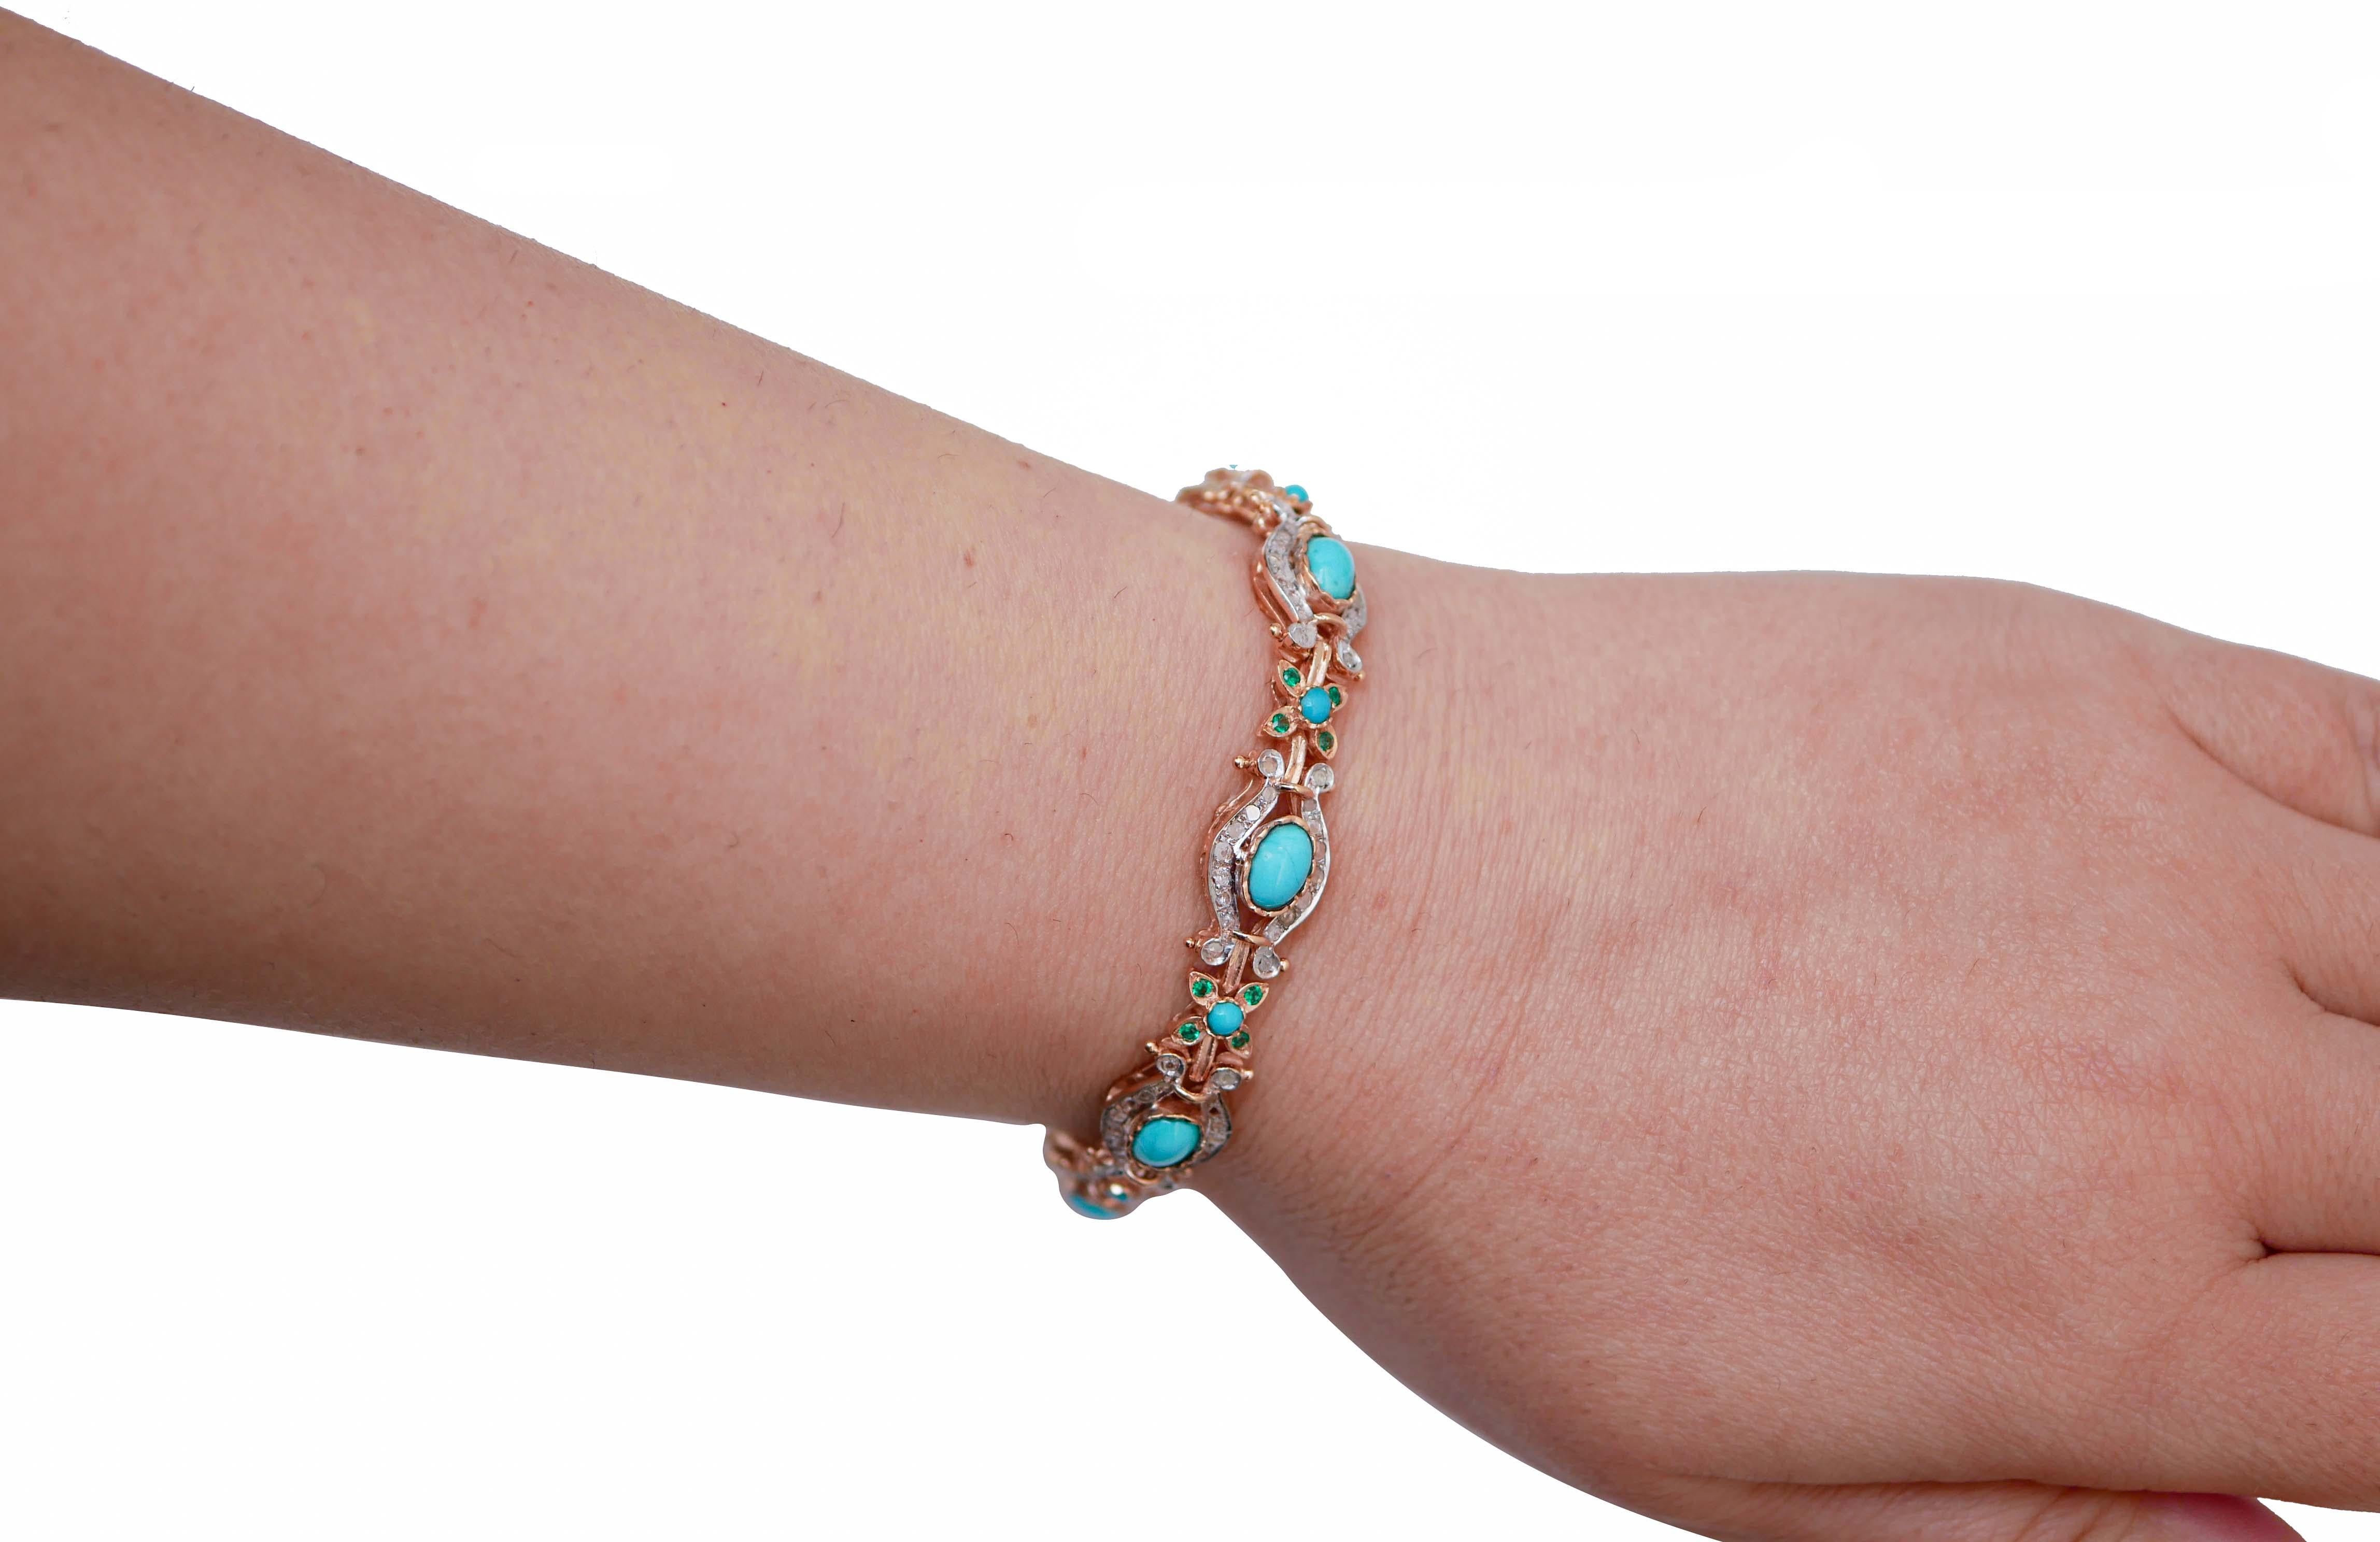 Mixed Cut Hydrothermal Spinel, Turquoise, Diamonds, Rose Gold and Silver Bracelet. For Sale